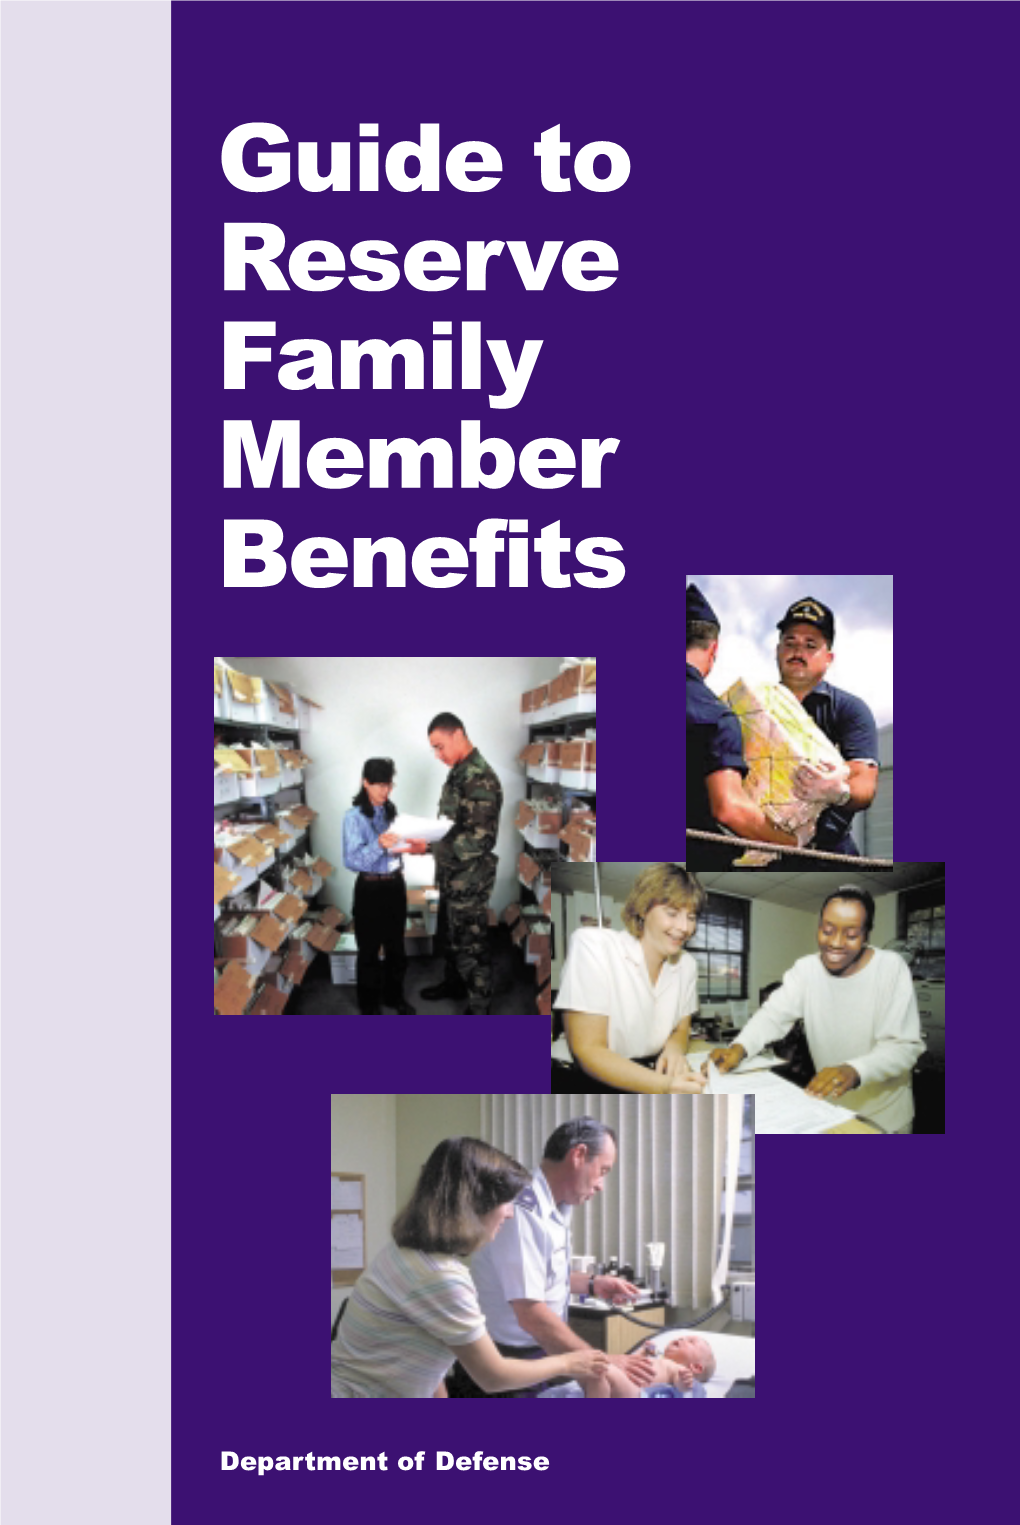 Guide to Reserve Family Member Benefits